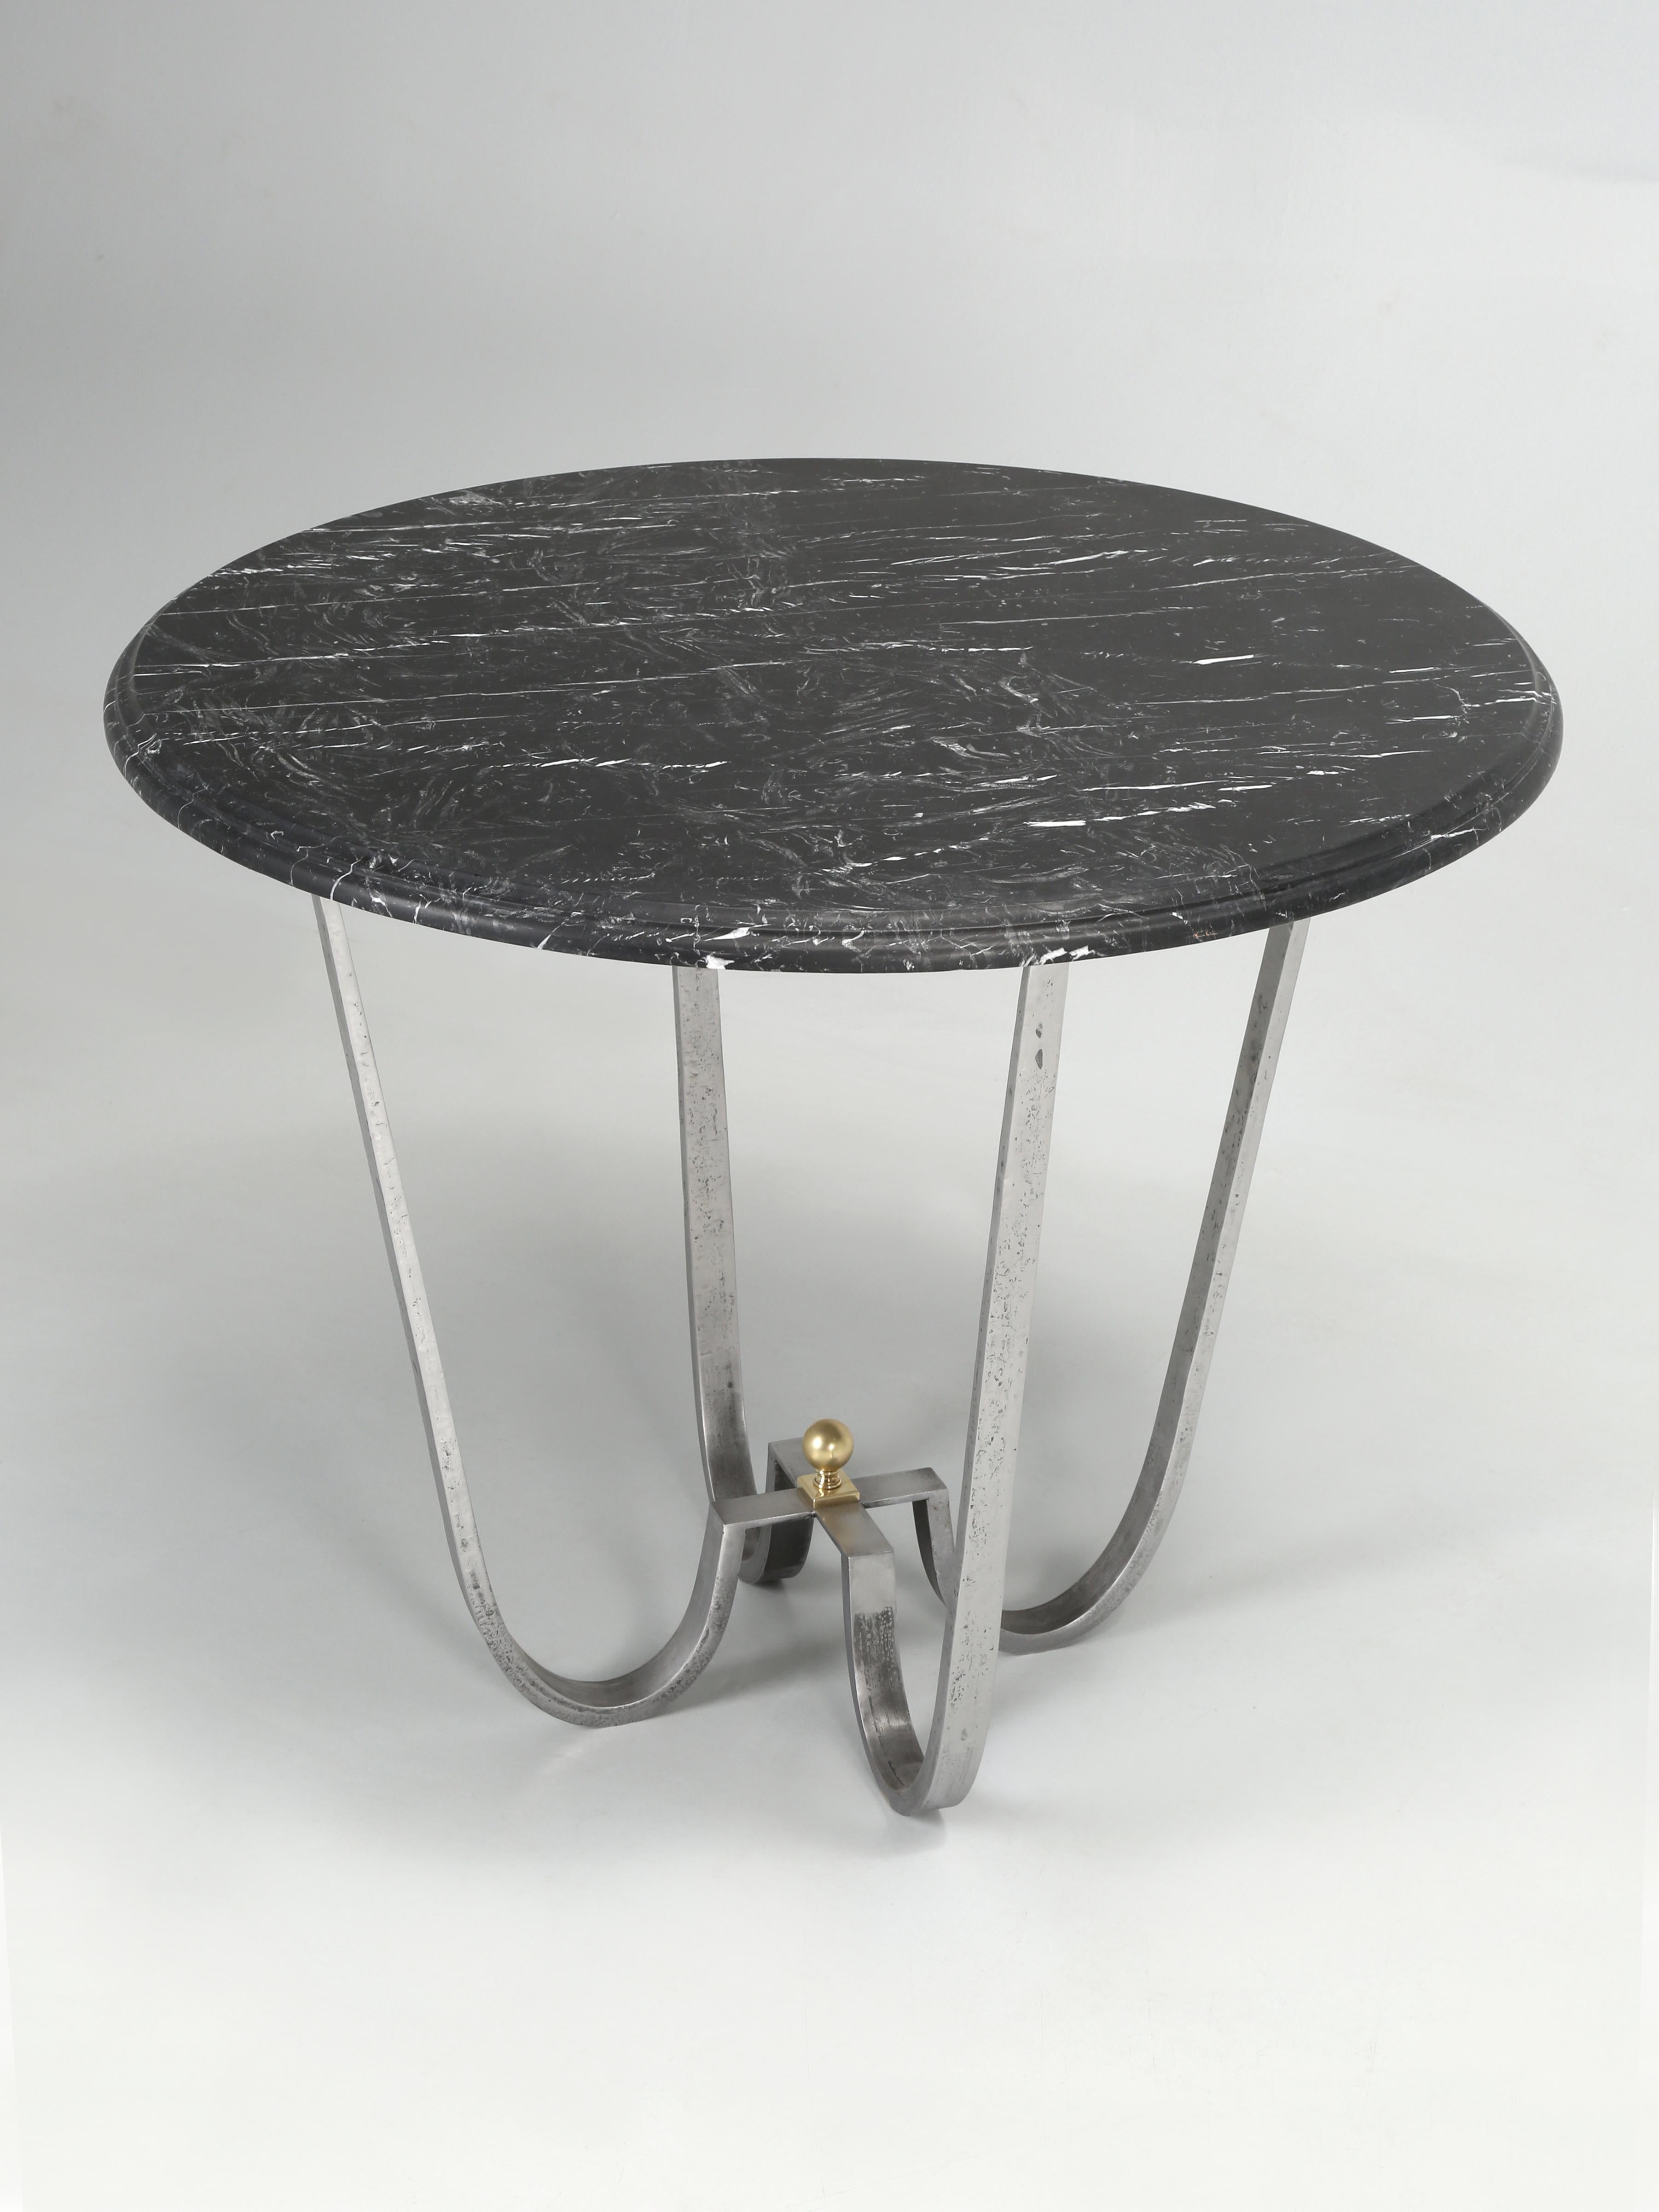 Center Hall Table or Possible End Table Hand-Made in Chicago and part of the Old Plank Collection of Furniture and Sheep. Our Mid-Century Modern Center Hall Tables are typically built to order and are available in a myriad of materials, from steel